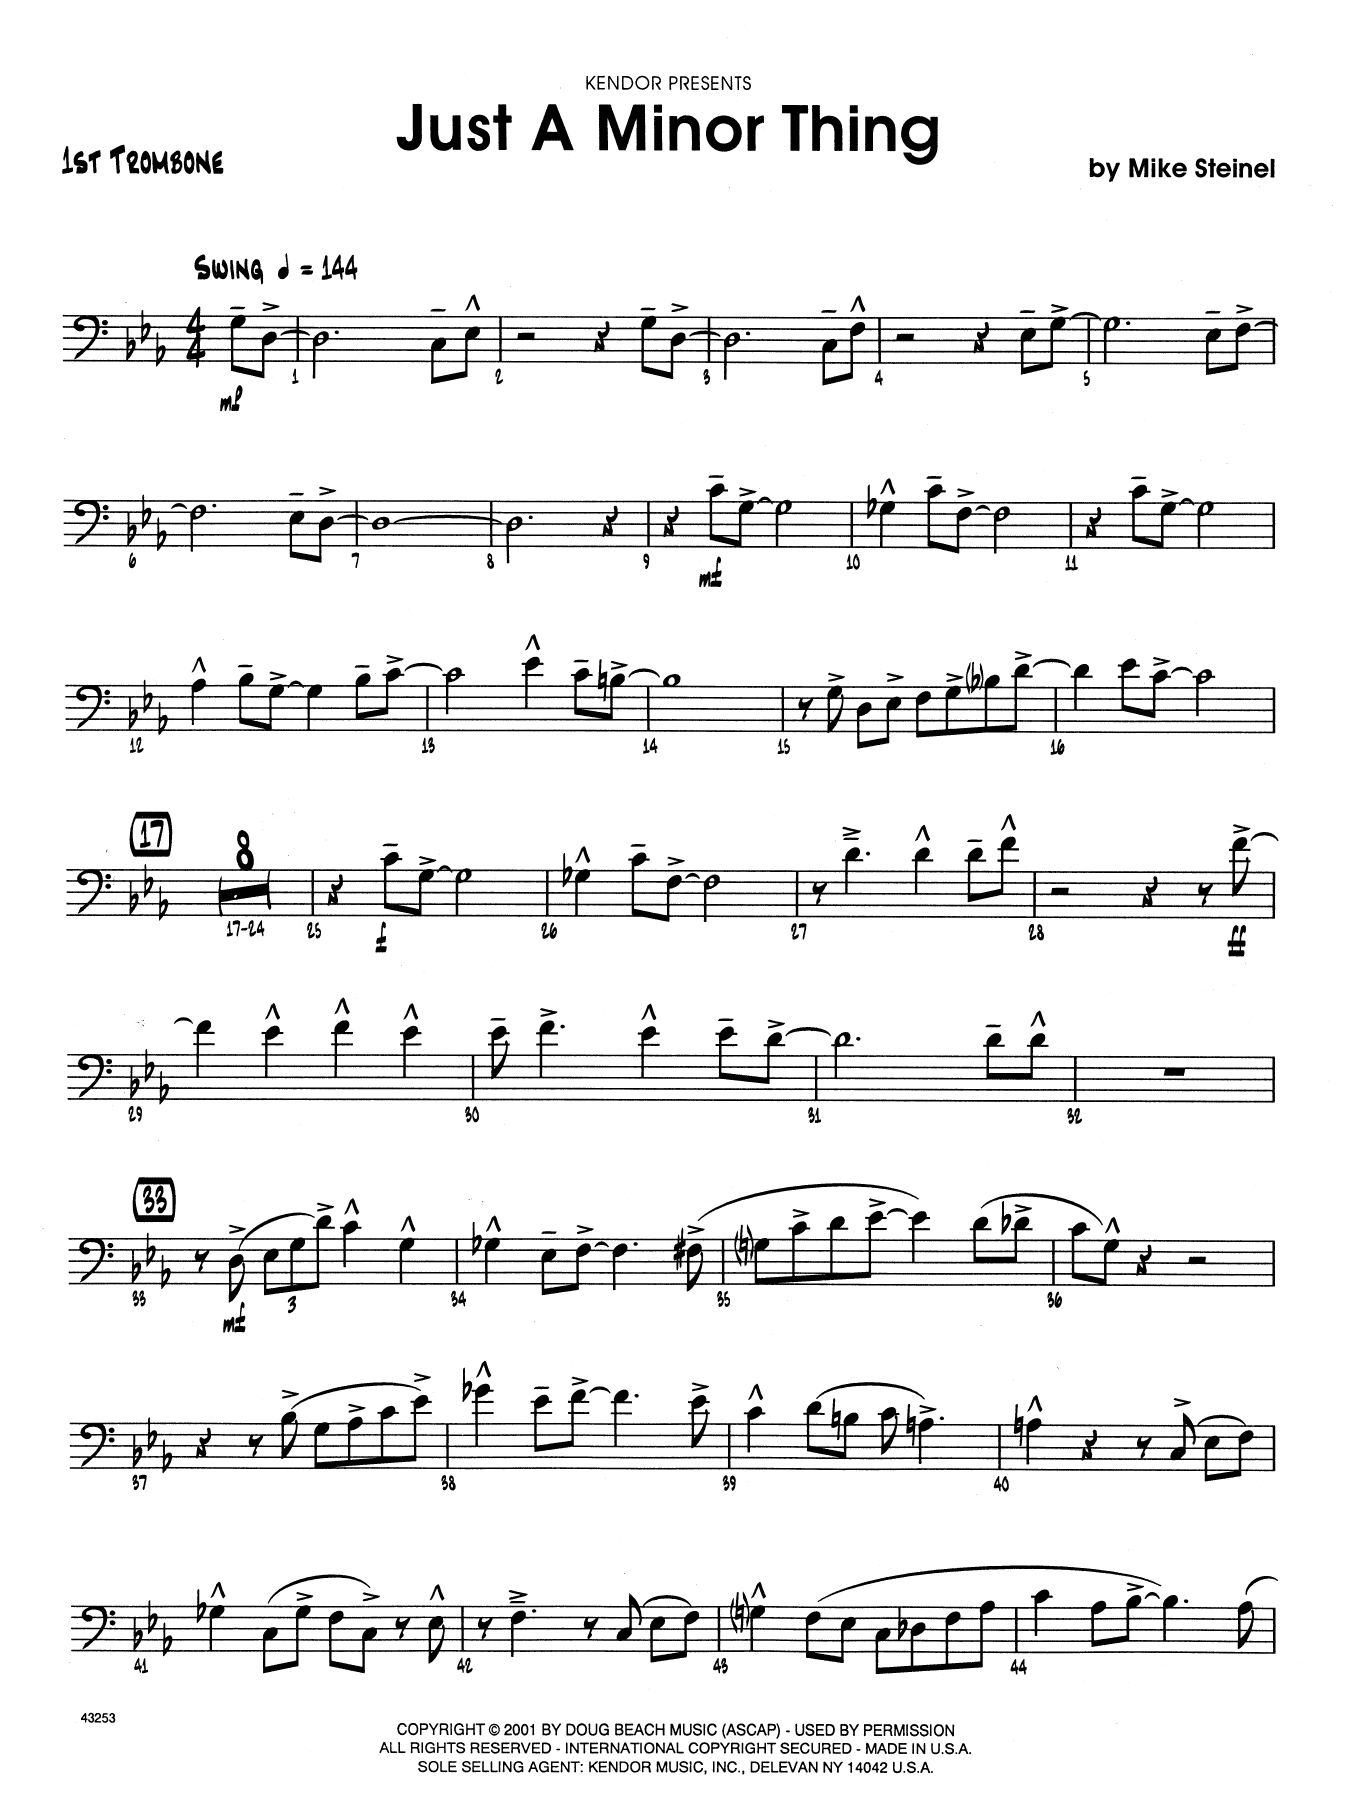 Download Mike Steinel Just A Minor Thing - 1st Trombone Sheet Music